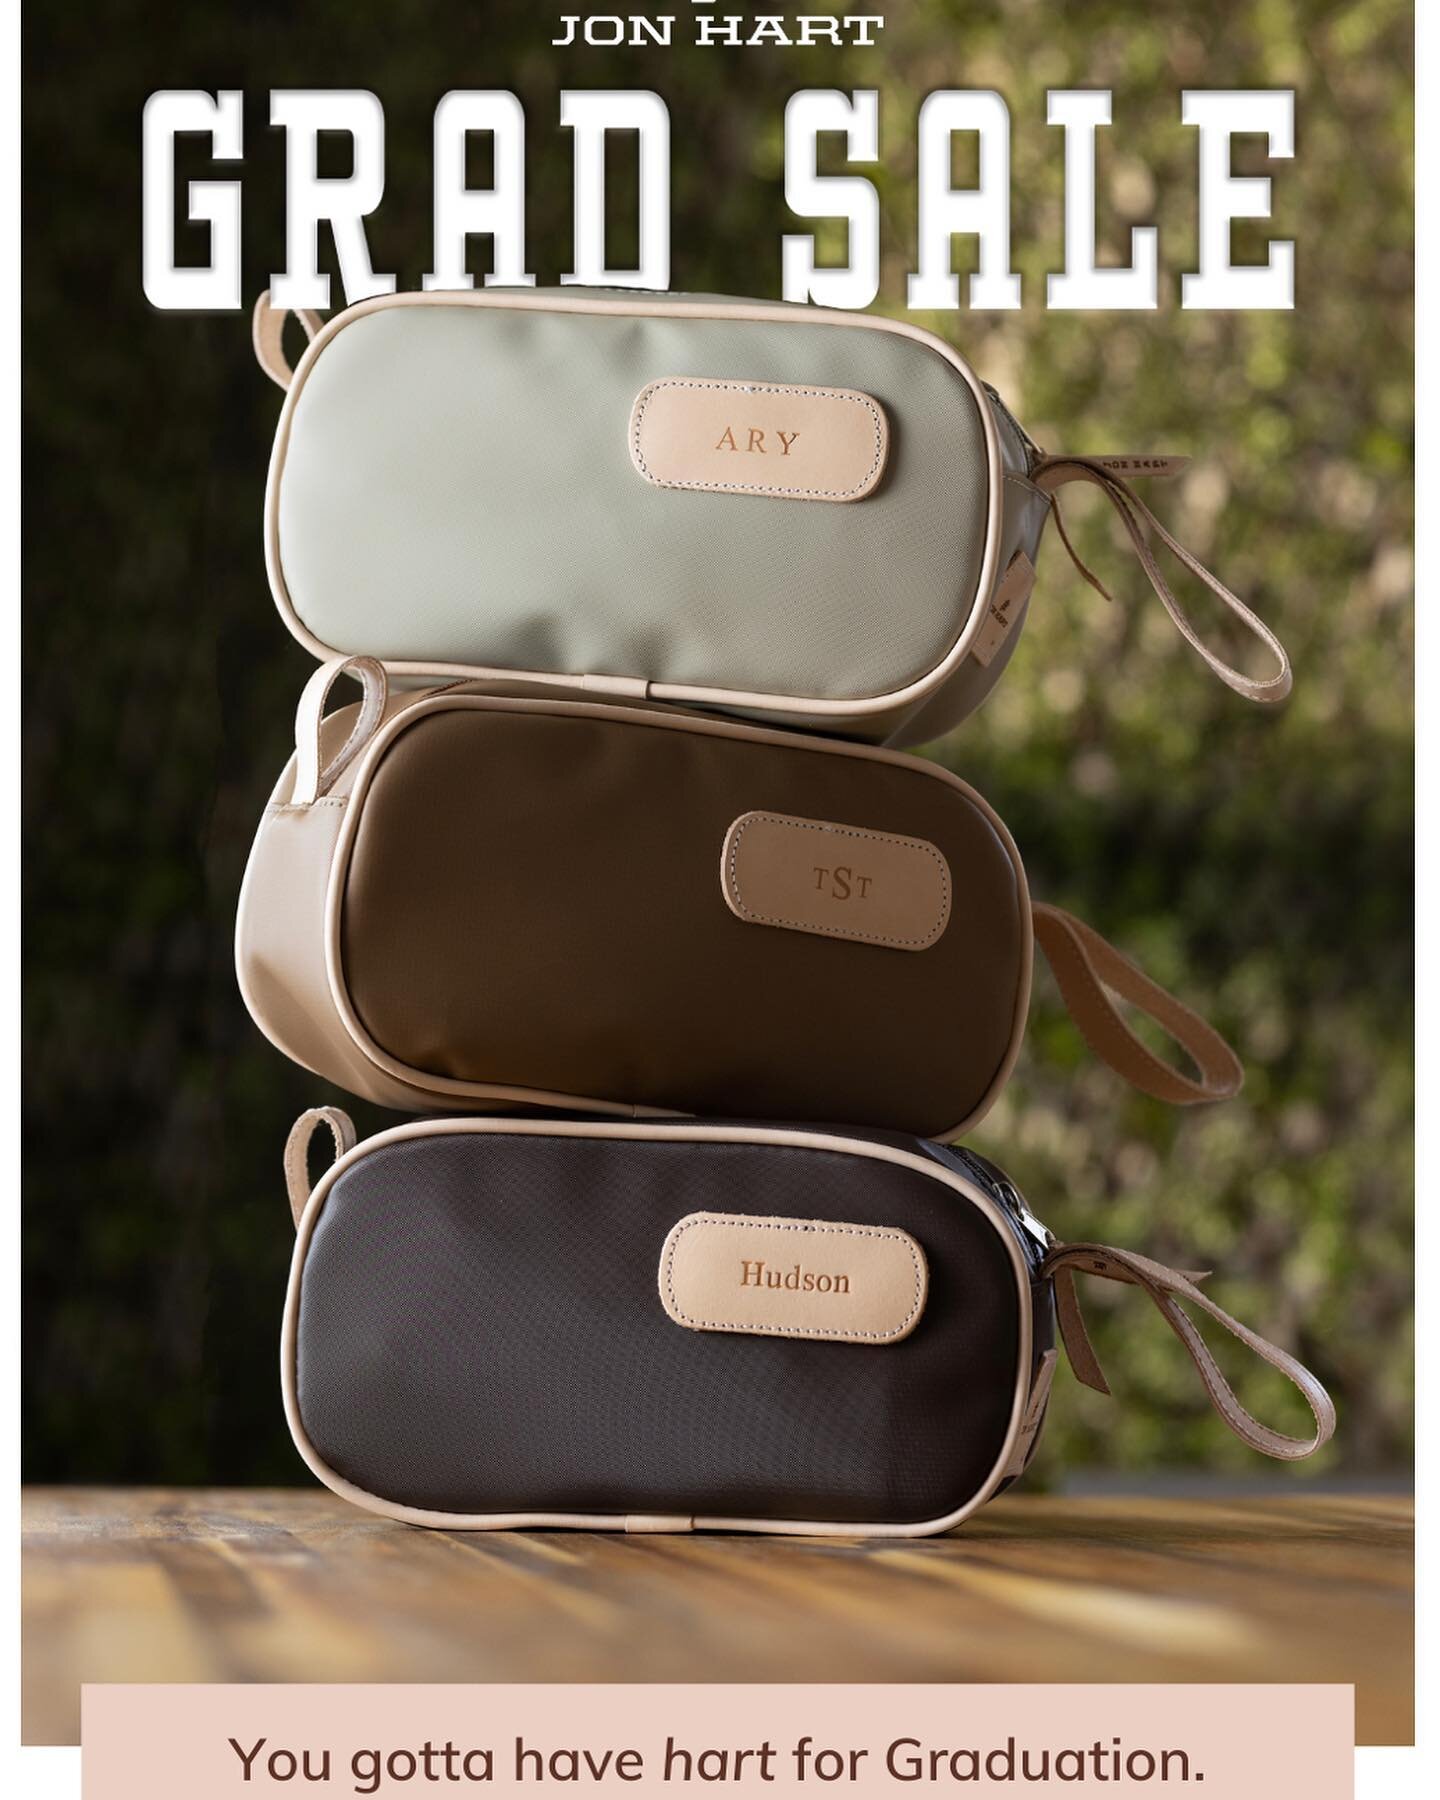 ONE MORE WEEK!!! Jon Hart Grad Sale ENDS Sunday! Purchase in store or online for sale prices! In-store purchases receive FREE hot stamping this week!!! Stock up!